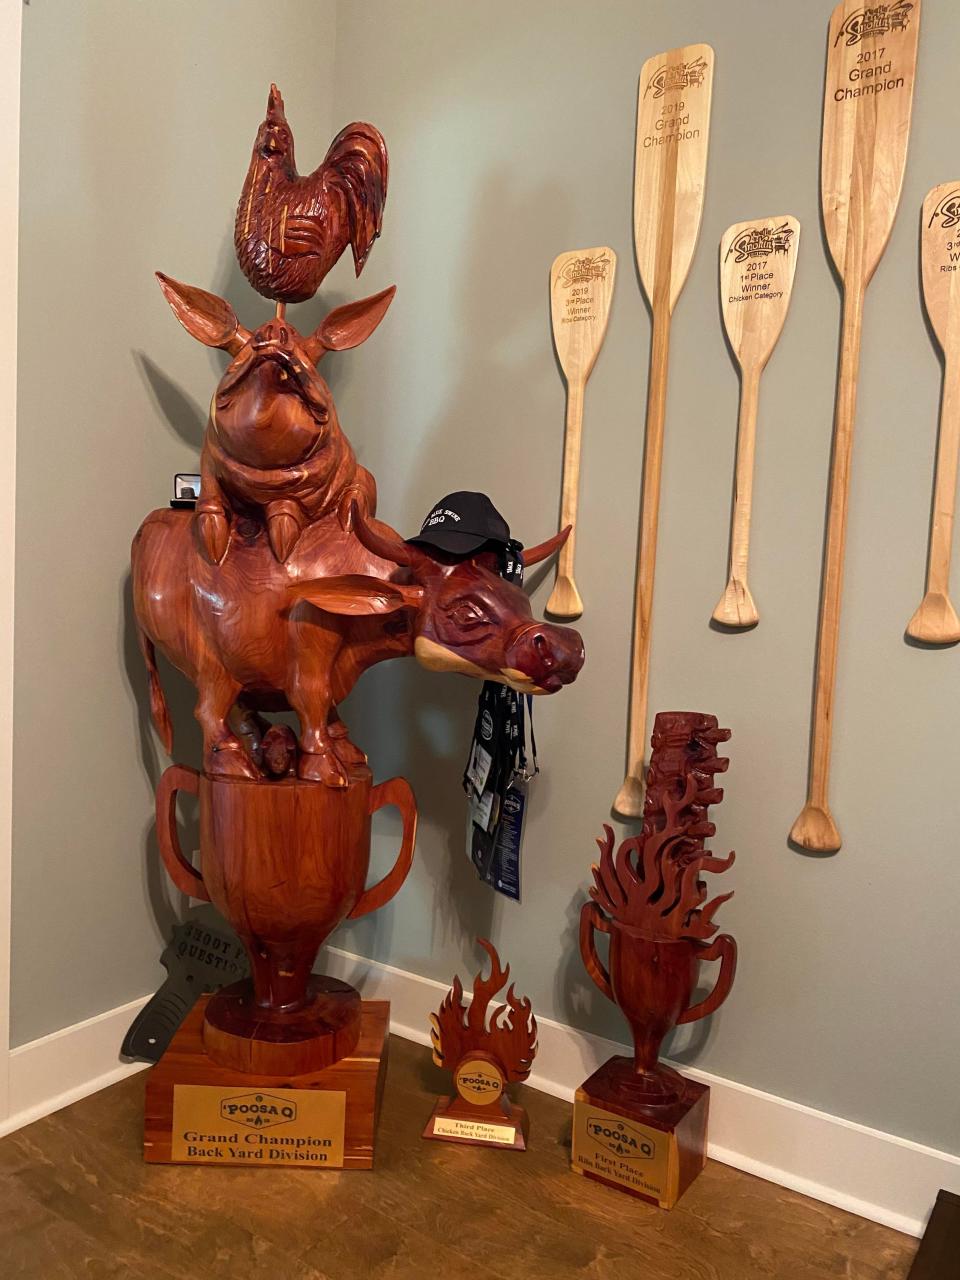 Three 2019 'Poosa Q trophies - Backyard Grand Champion, First Place Ribs, and Third Place Chicken - in the Evans home in Huntsville.